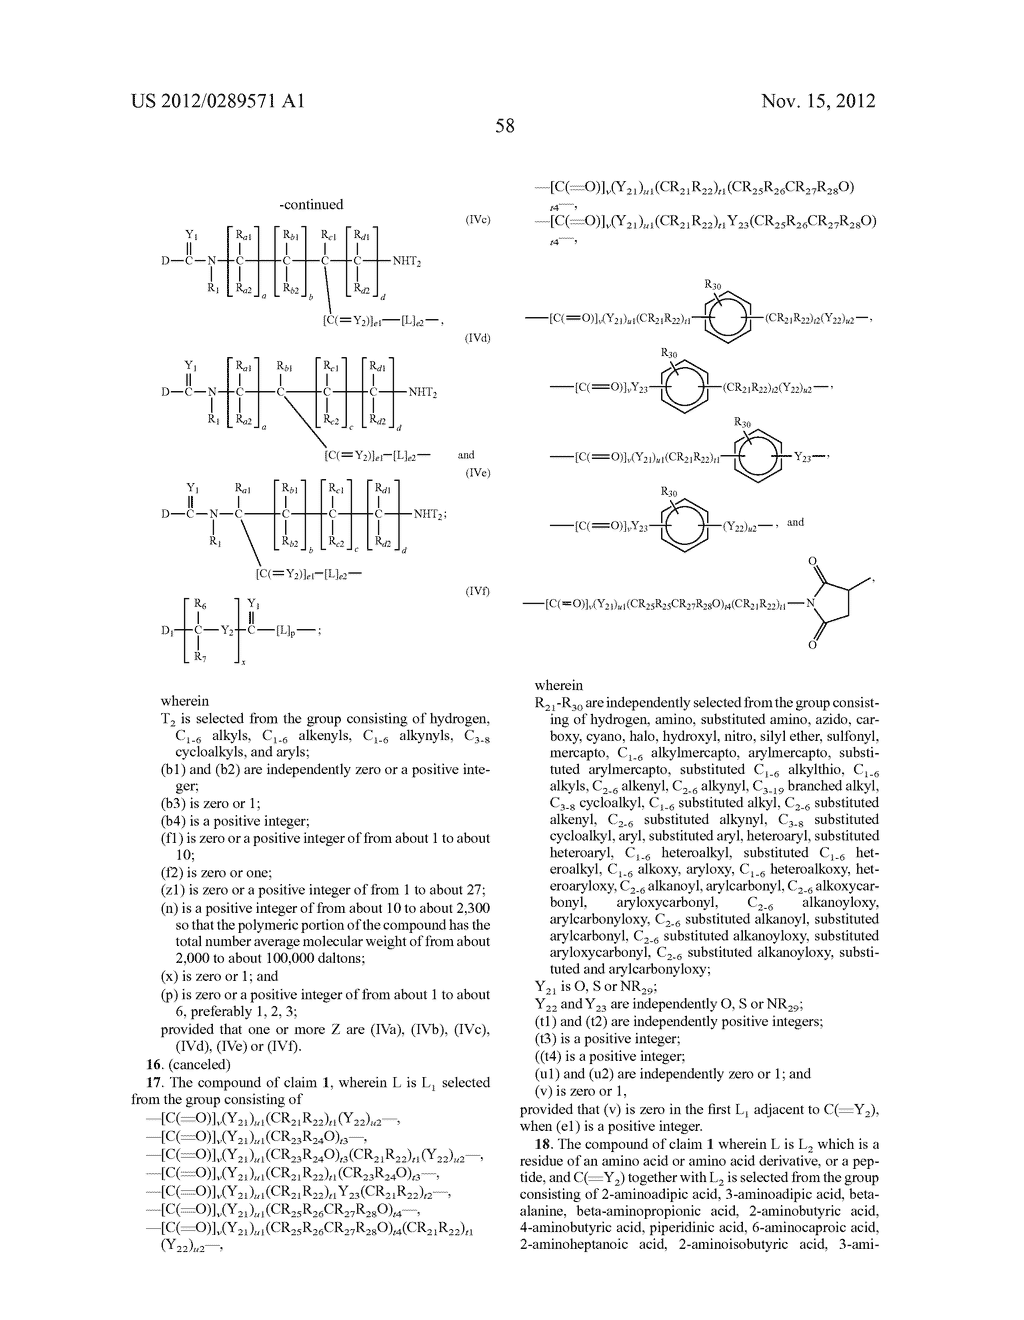 POLYMERIC CONJUGATES OF AROMATIC AMINE CONTAINING COMPOUNDS INCLUDING     RELEASABLE UREA LINKER - diagram, schematic, and image 79